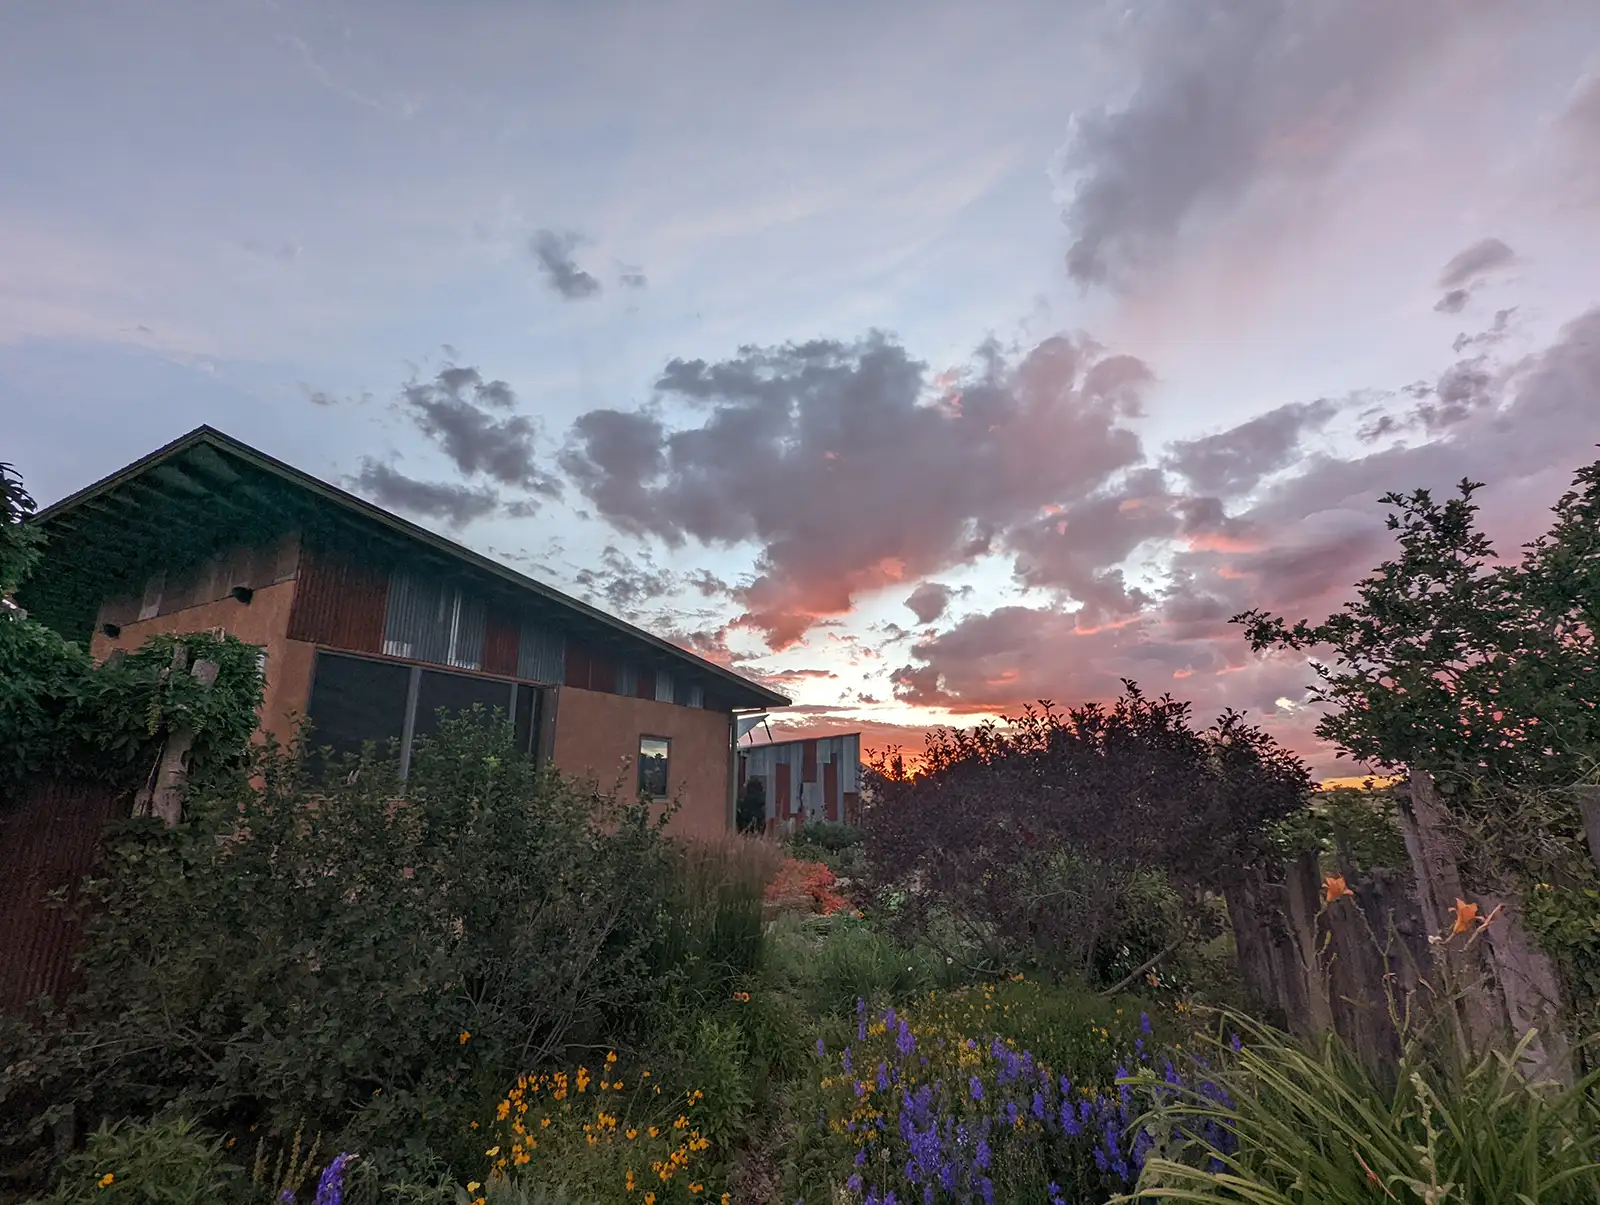 Glorious sunsets provide dramatic lighting in this garden view.